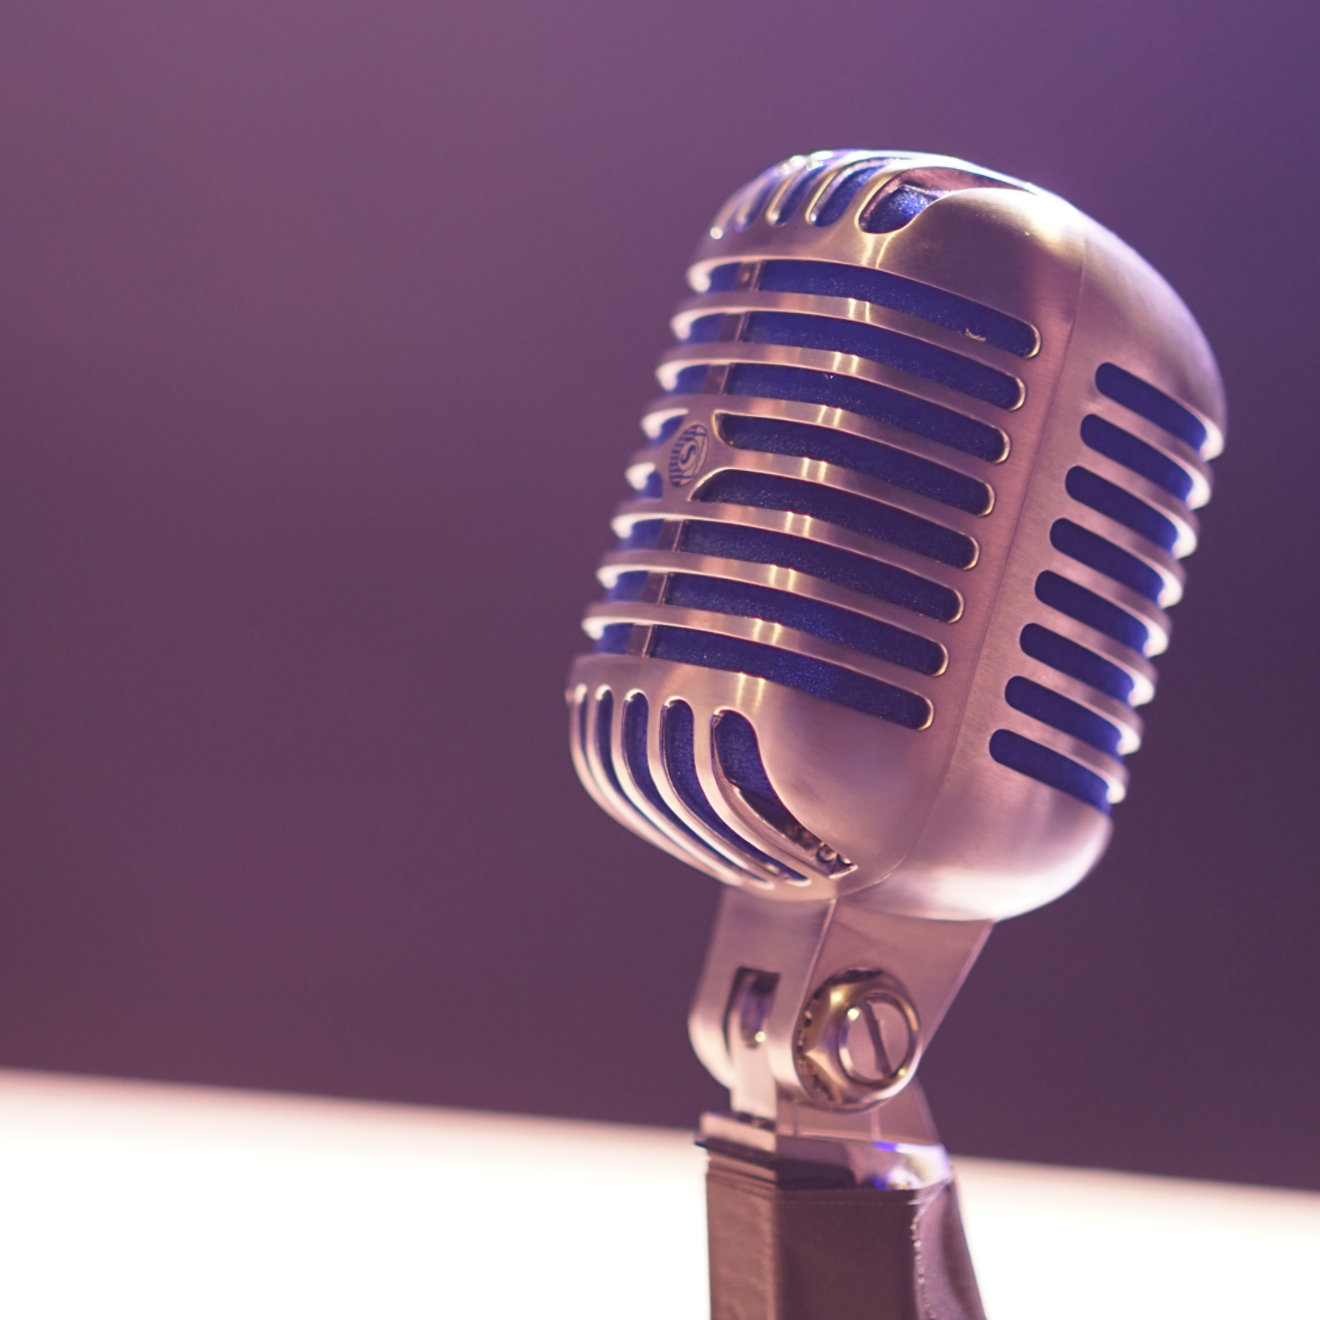 A picture of a microphone